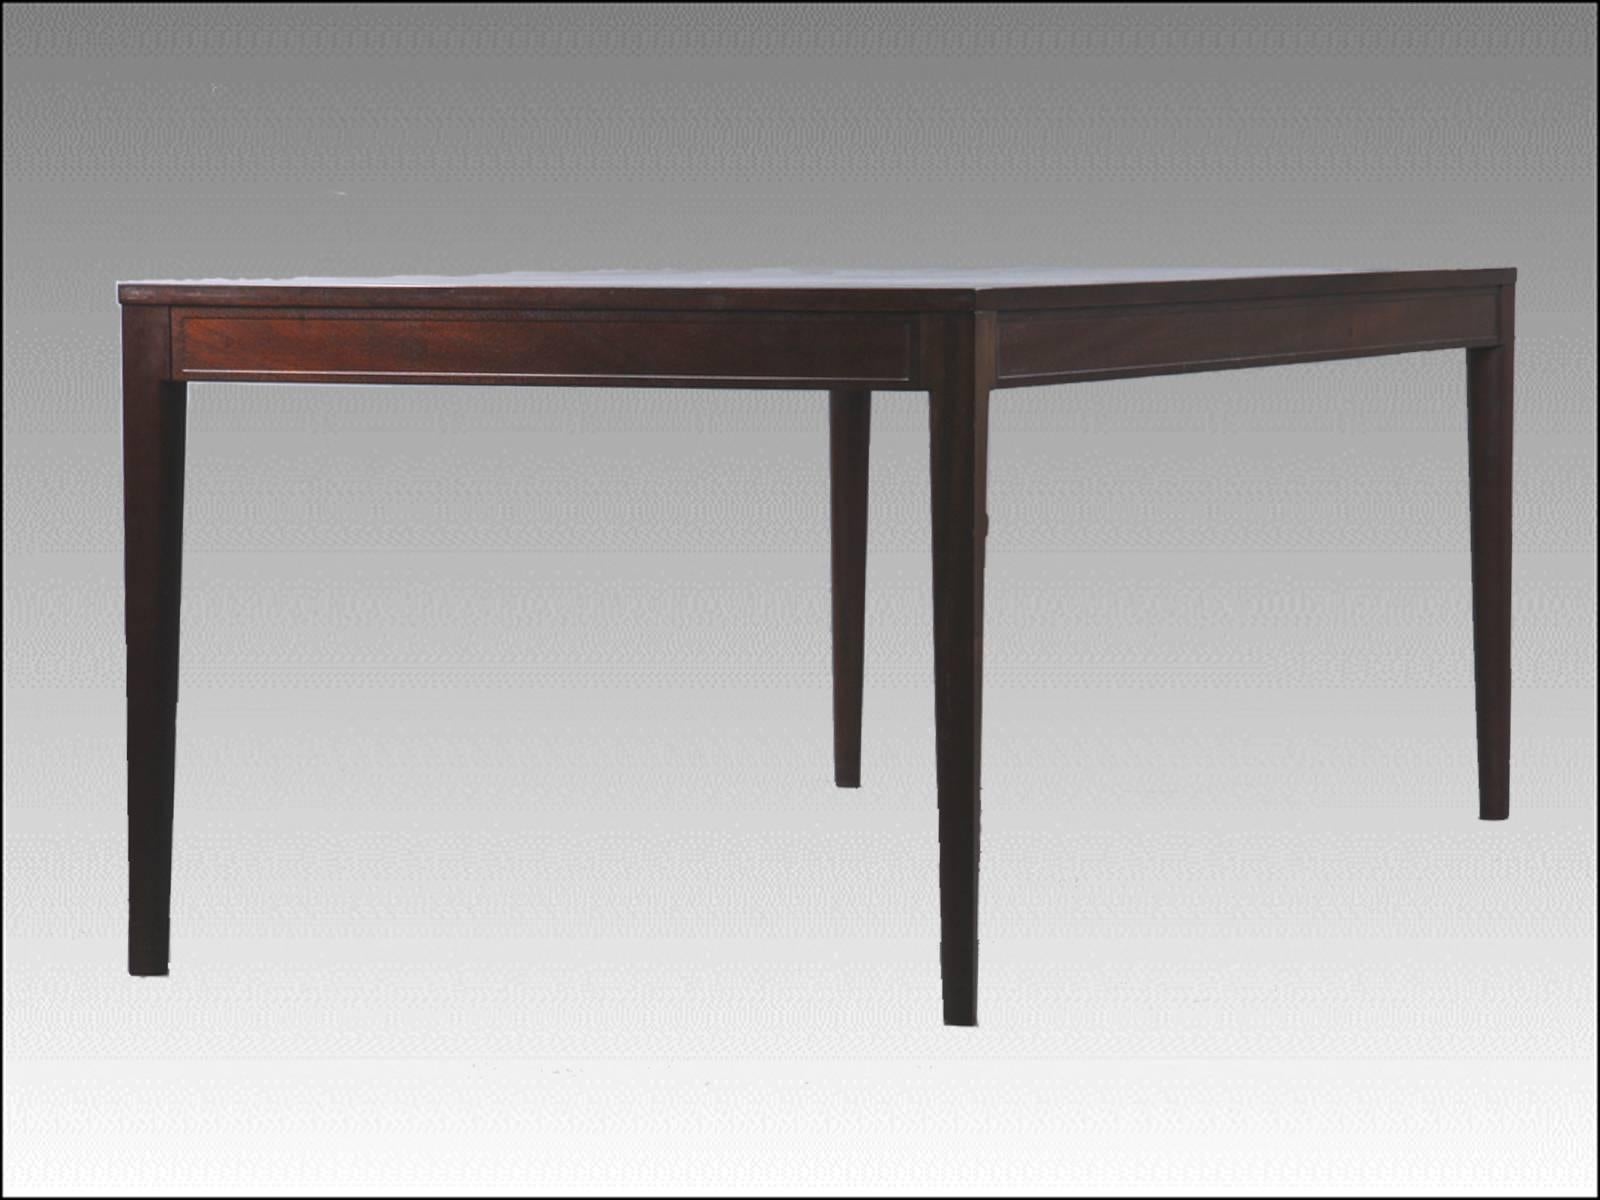 1960s Finn Juhl mahogany dining or conference table from the diplomat series by Cado

Finn Juhl designed a series of furniture´from 1961 called the Diplomat series with chairs, desks, tables, cabinets and other furniture that was made in Bangkok